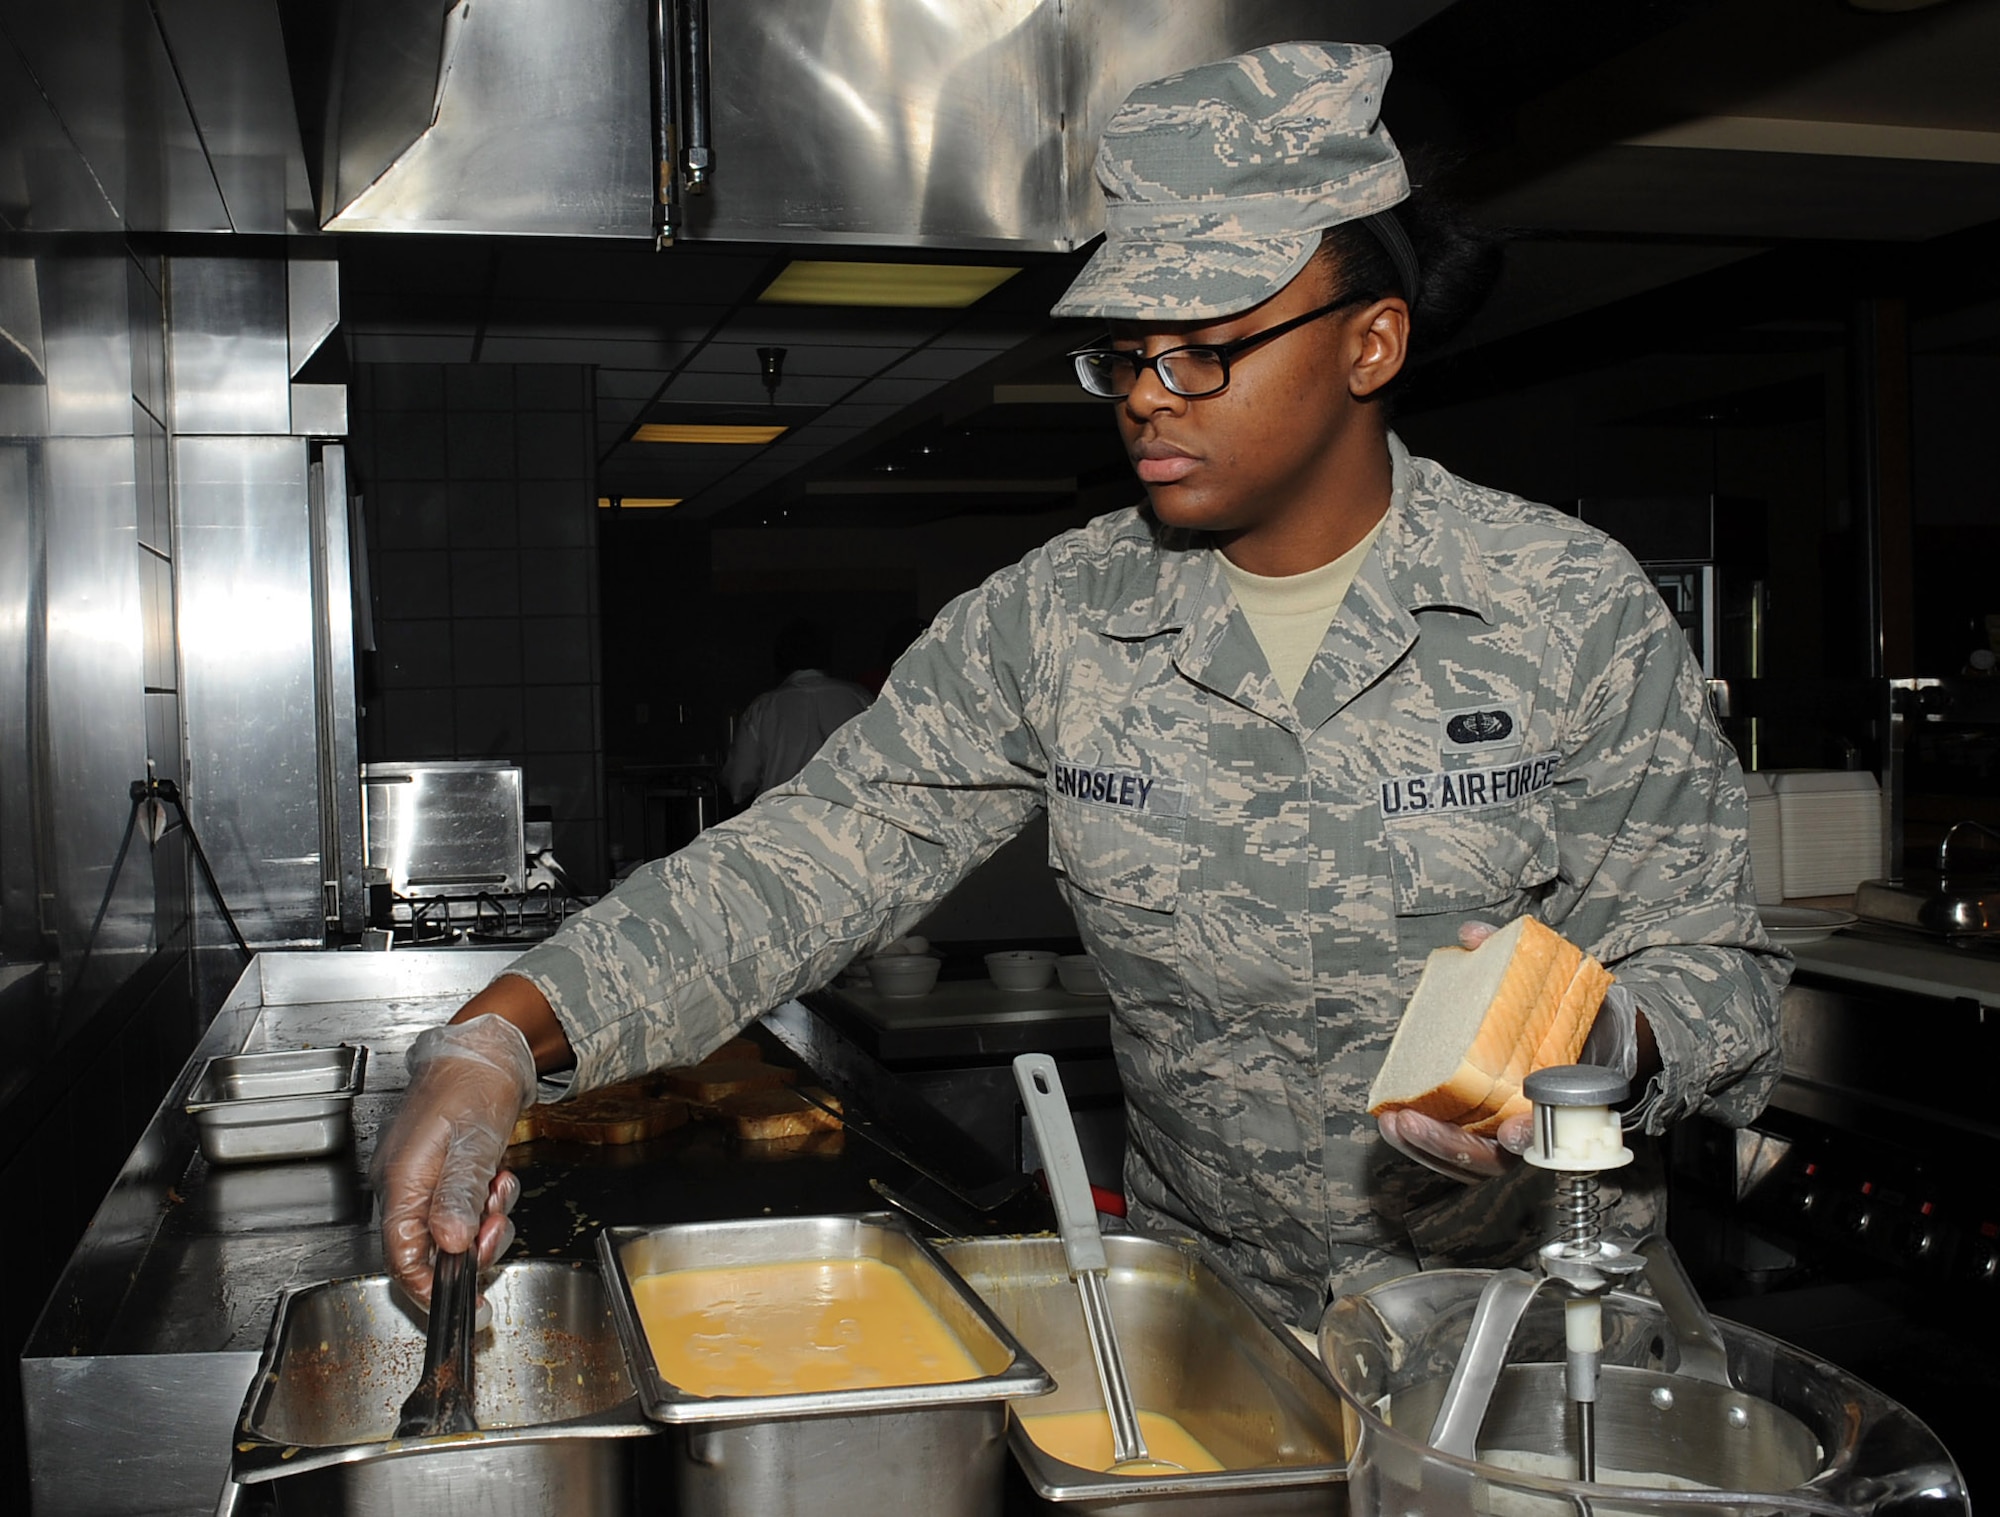 Senior Airman Kelsea Endsley, 22nd Force Support Squadron food services journeyman, prepares breakfast at the Chisholm Trail Inn, April 14, 2016. Endsley recently became a shift leader in the dining facility and now leads breakfast and lunch operations to help keep Airmen fit to fight. (U.S. Air Force photo/Airman Erin McClellan)